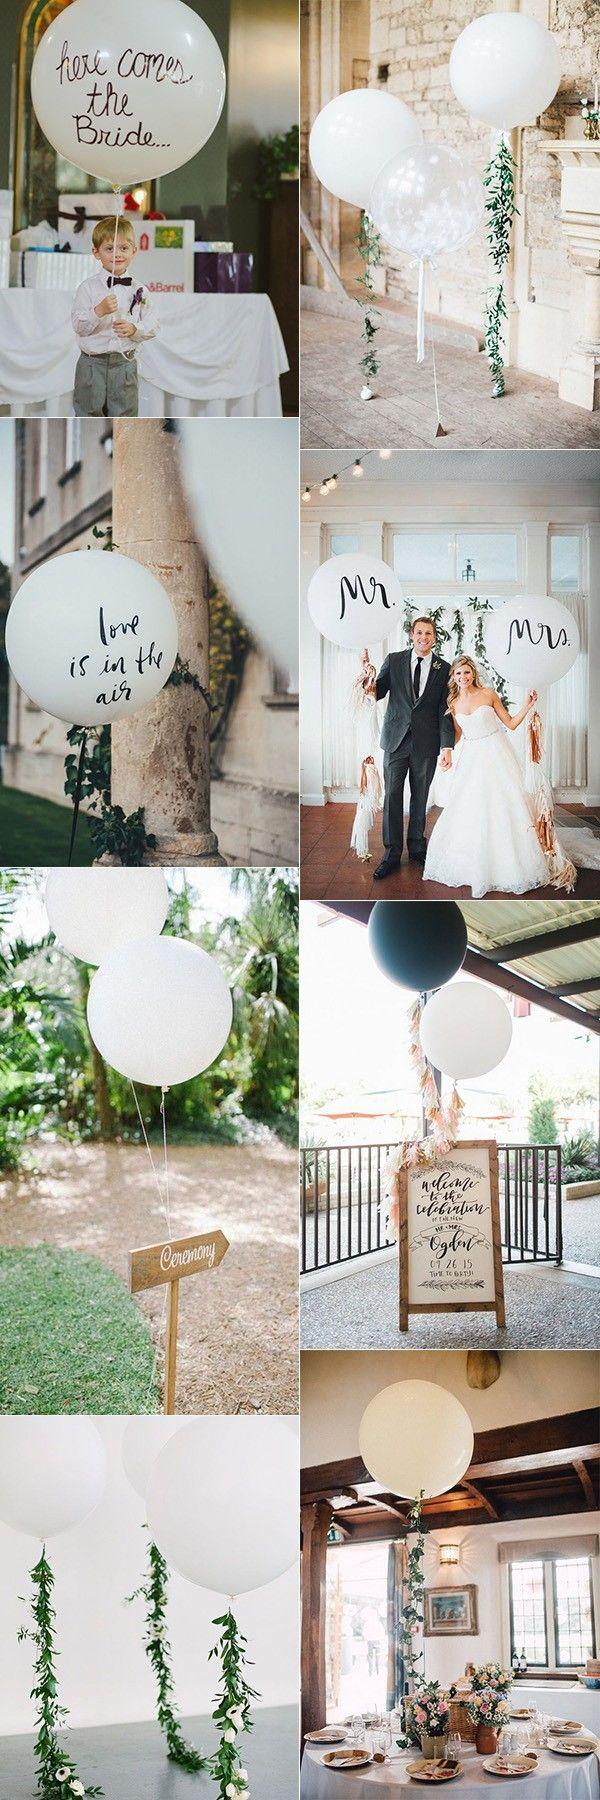 Hochzeit - 18 Awesome Wedding Ideas To Use Balloons